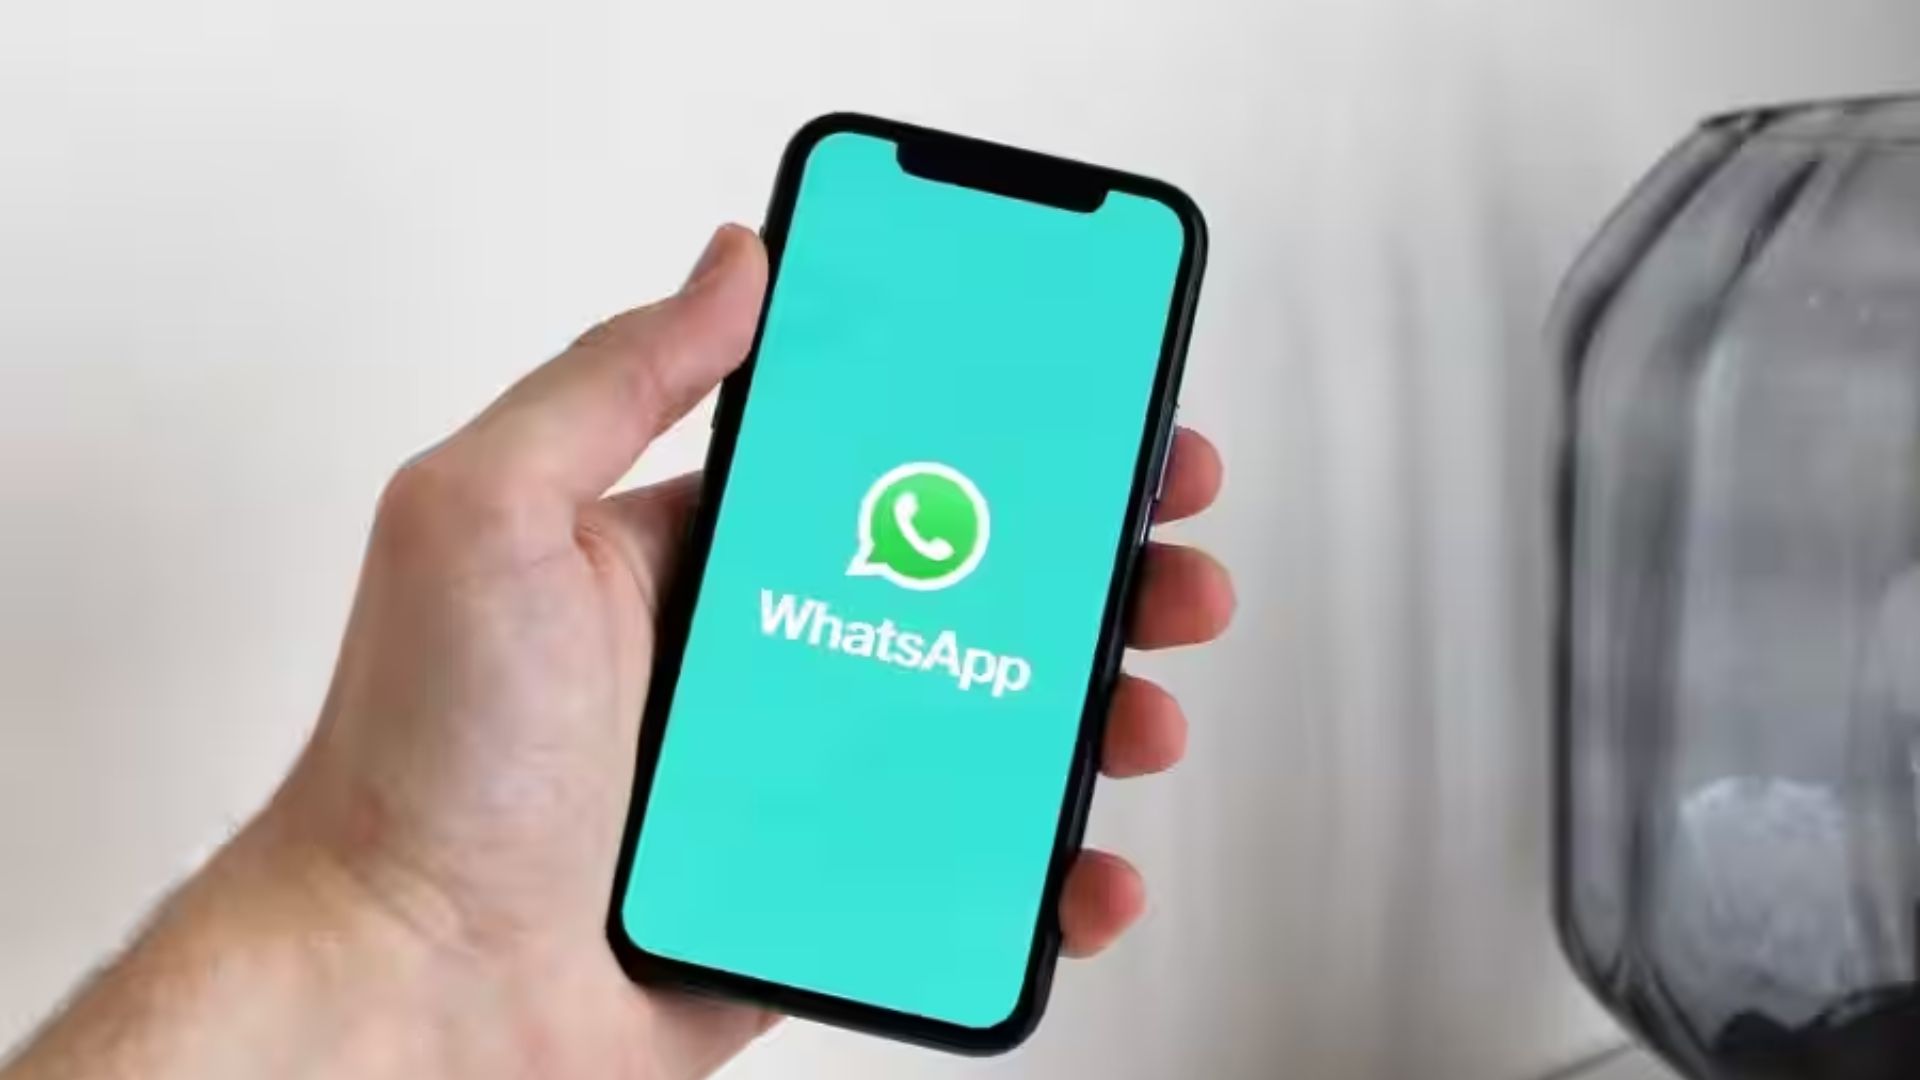 The New WhatsApp Feature Allows Selected Users To Restore Chats On Their New Phone